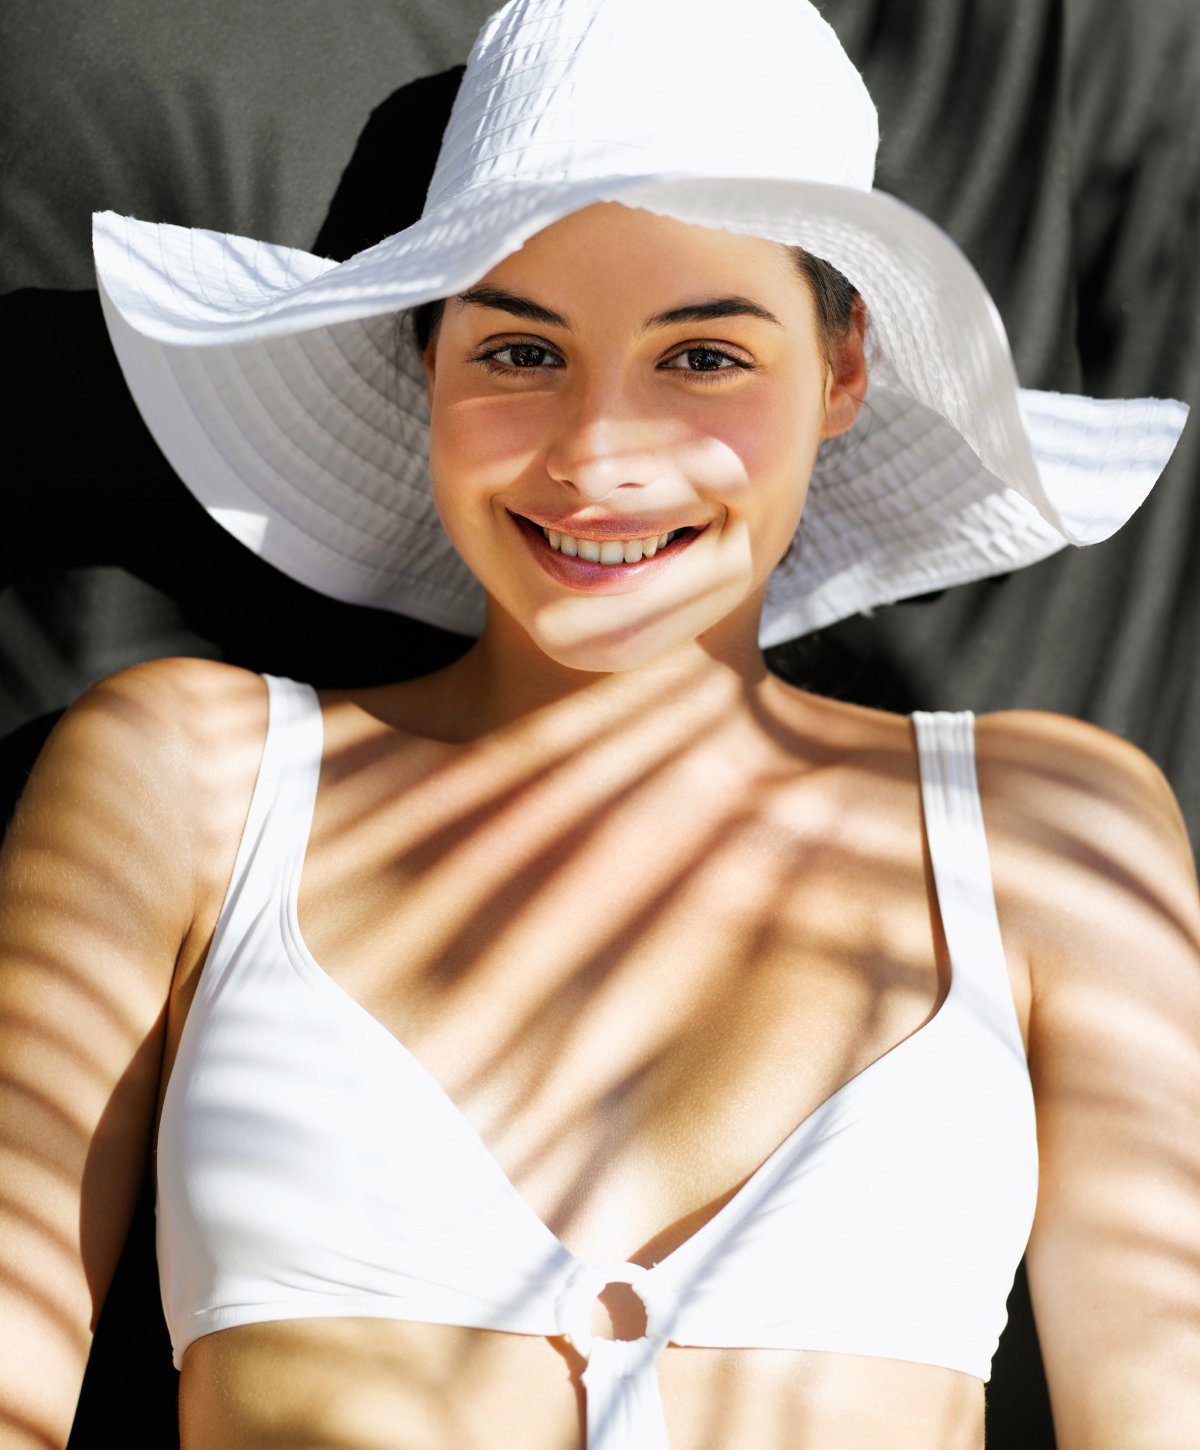 prp injections model smiling with white hat and top in dappled sunlight